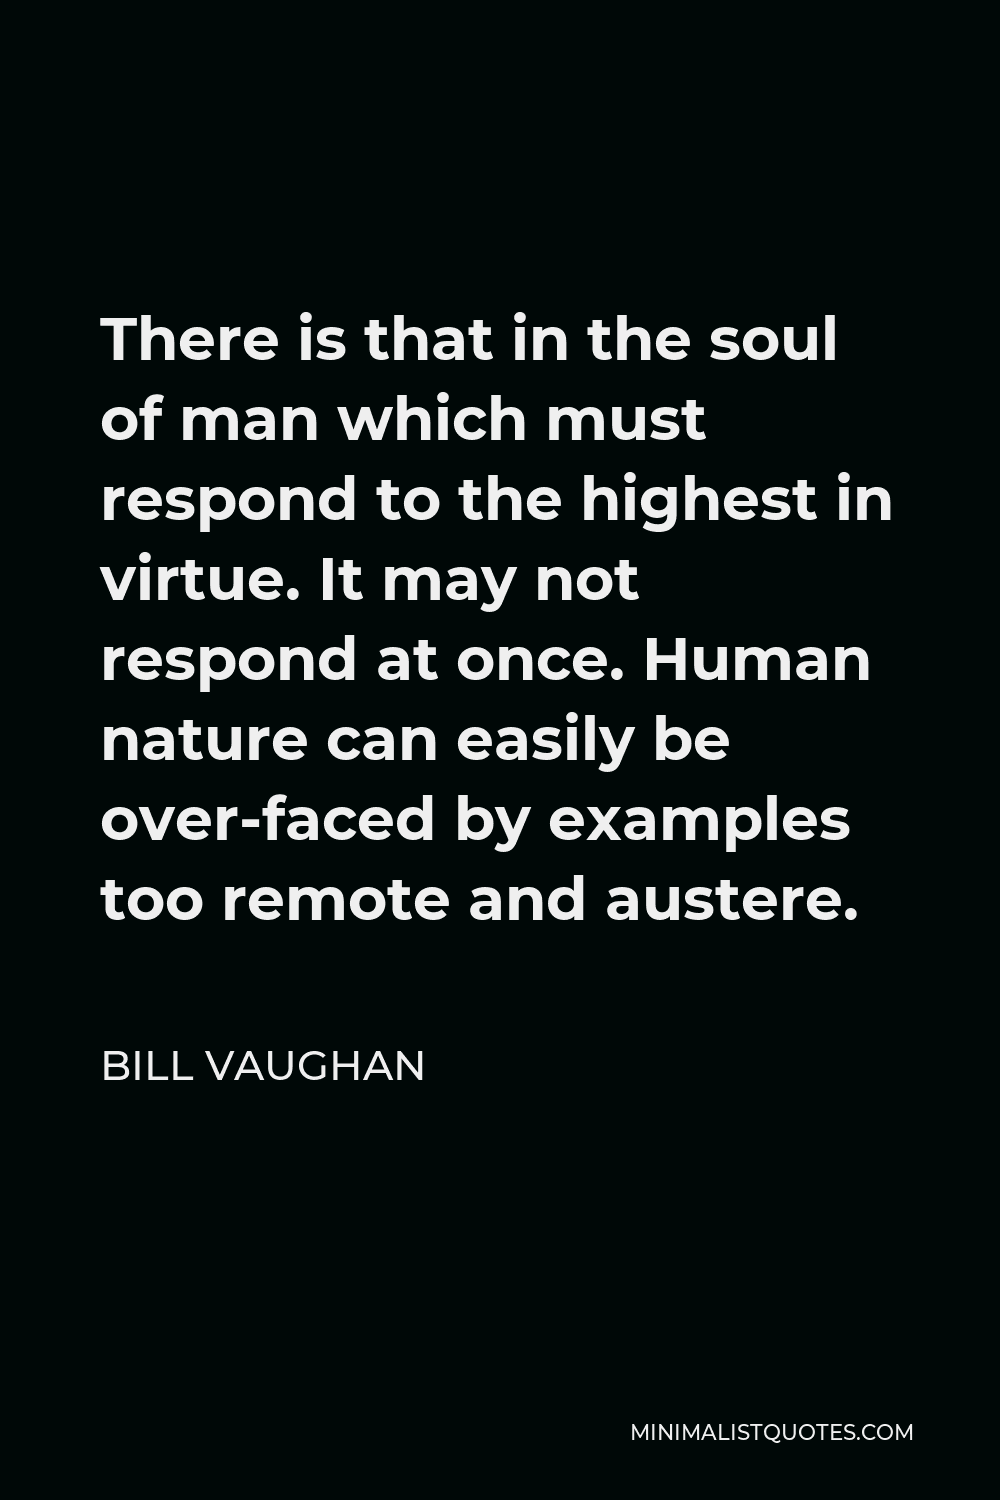 Bill Vaughan Quote - There is that in the soul of man which must respond to the highest in virtue. It may not respond at once. Human nature can easily be over-faced by examples too remote and austere.